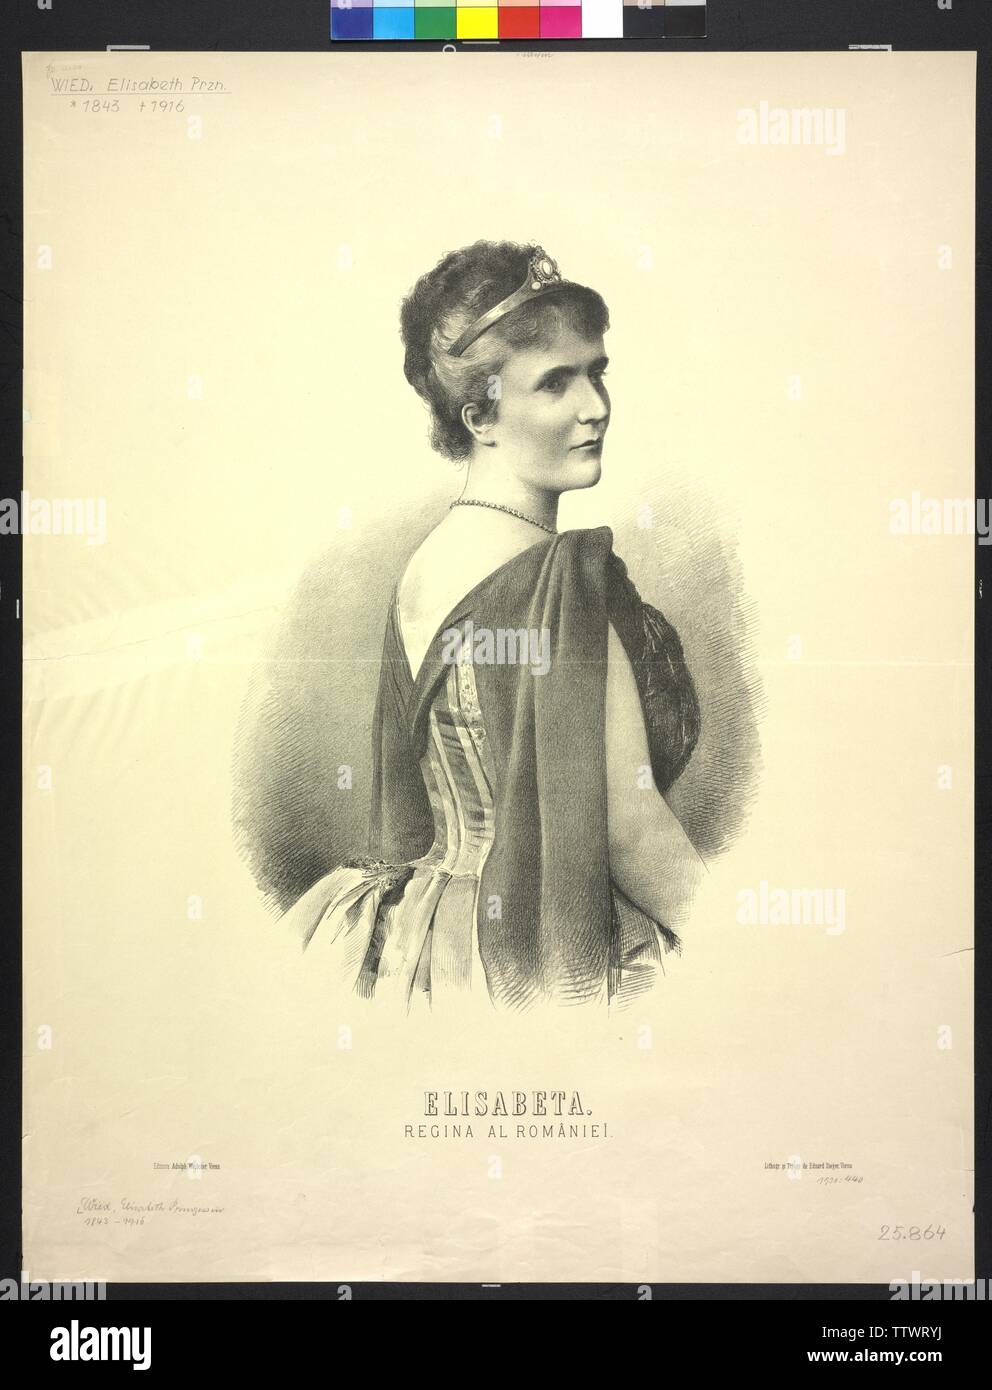 Wied, Elisabeth princess, lithograph and print by Eduard Sieger, Additional-Rights-Clearance-Info-Not-Available Stock Photo